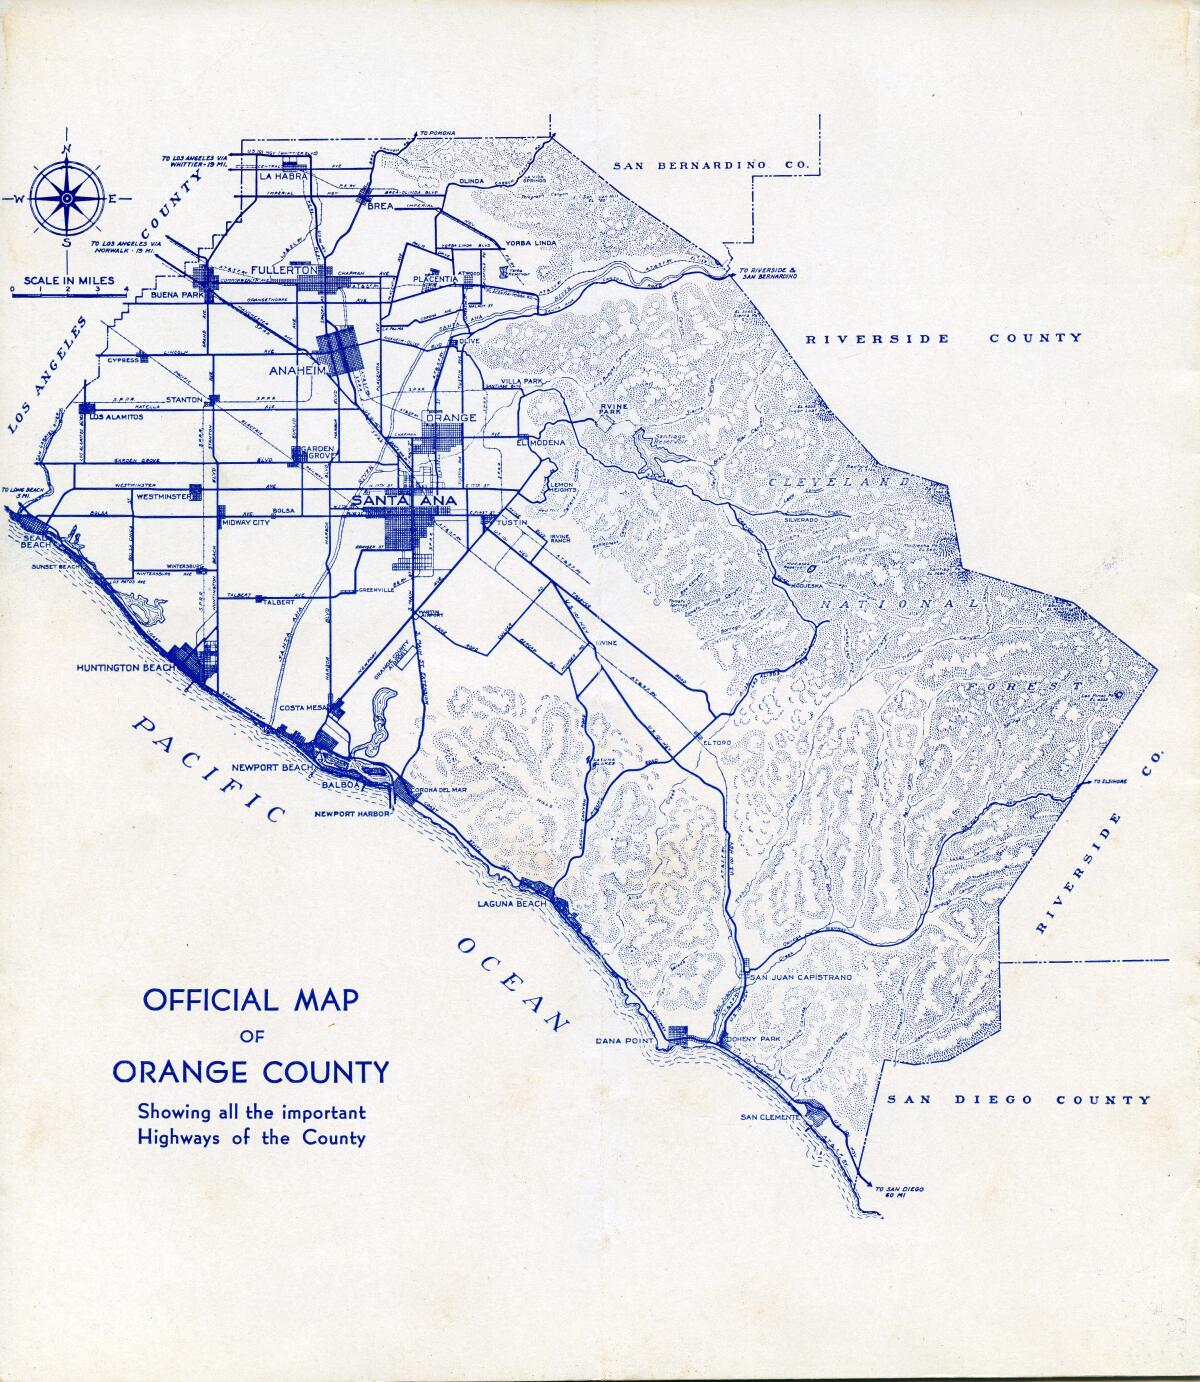 A map highlighting all the paved highways of Orange County from 1938. The map is included in the exhibit.